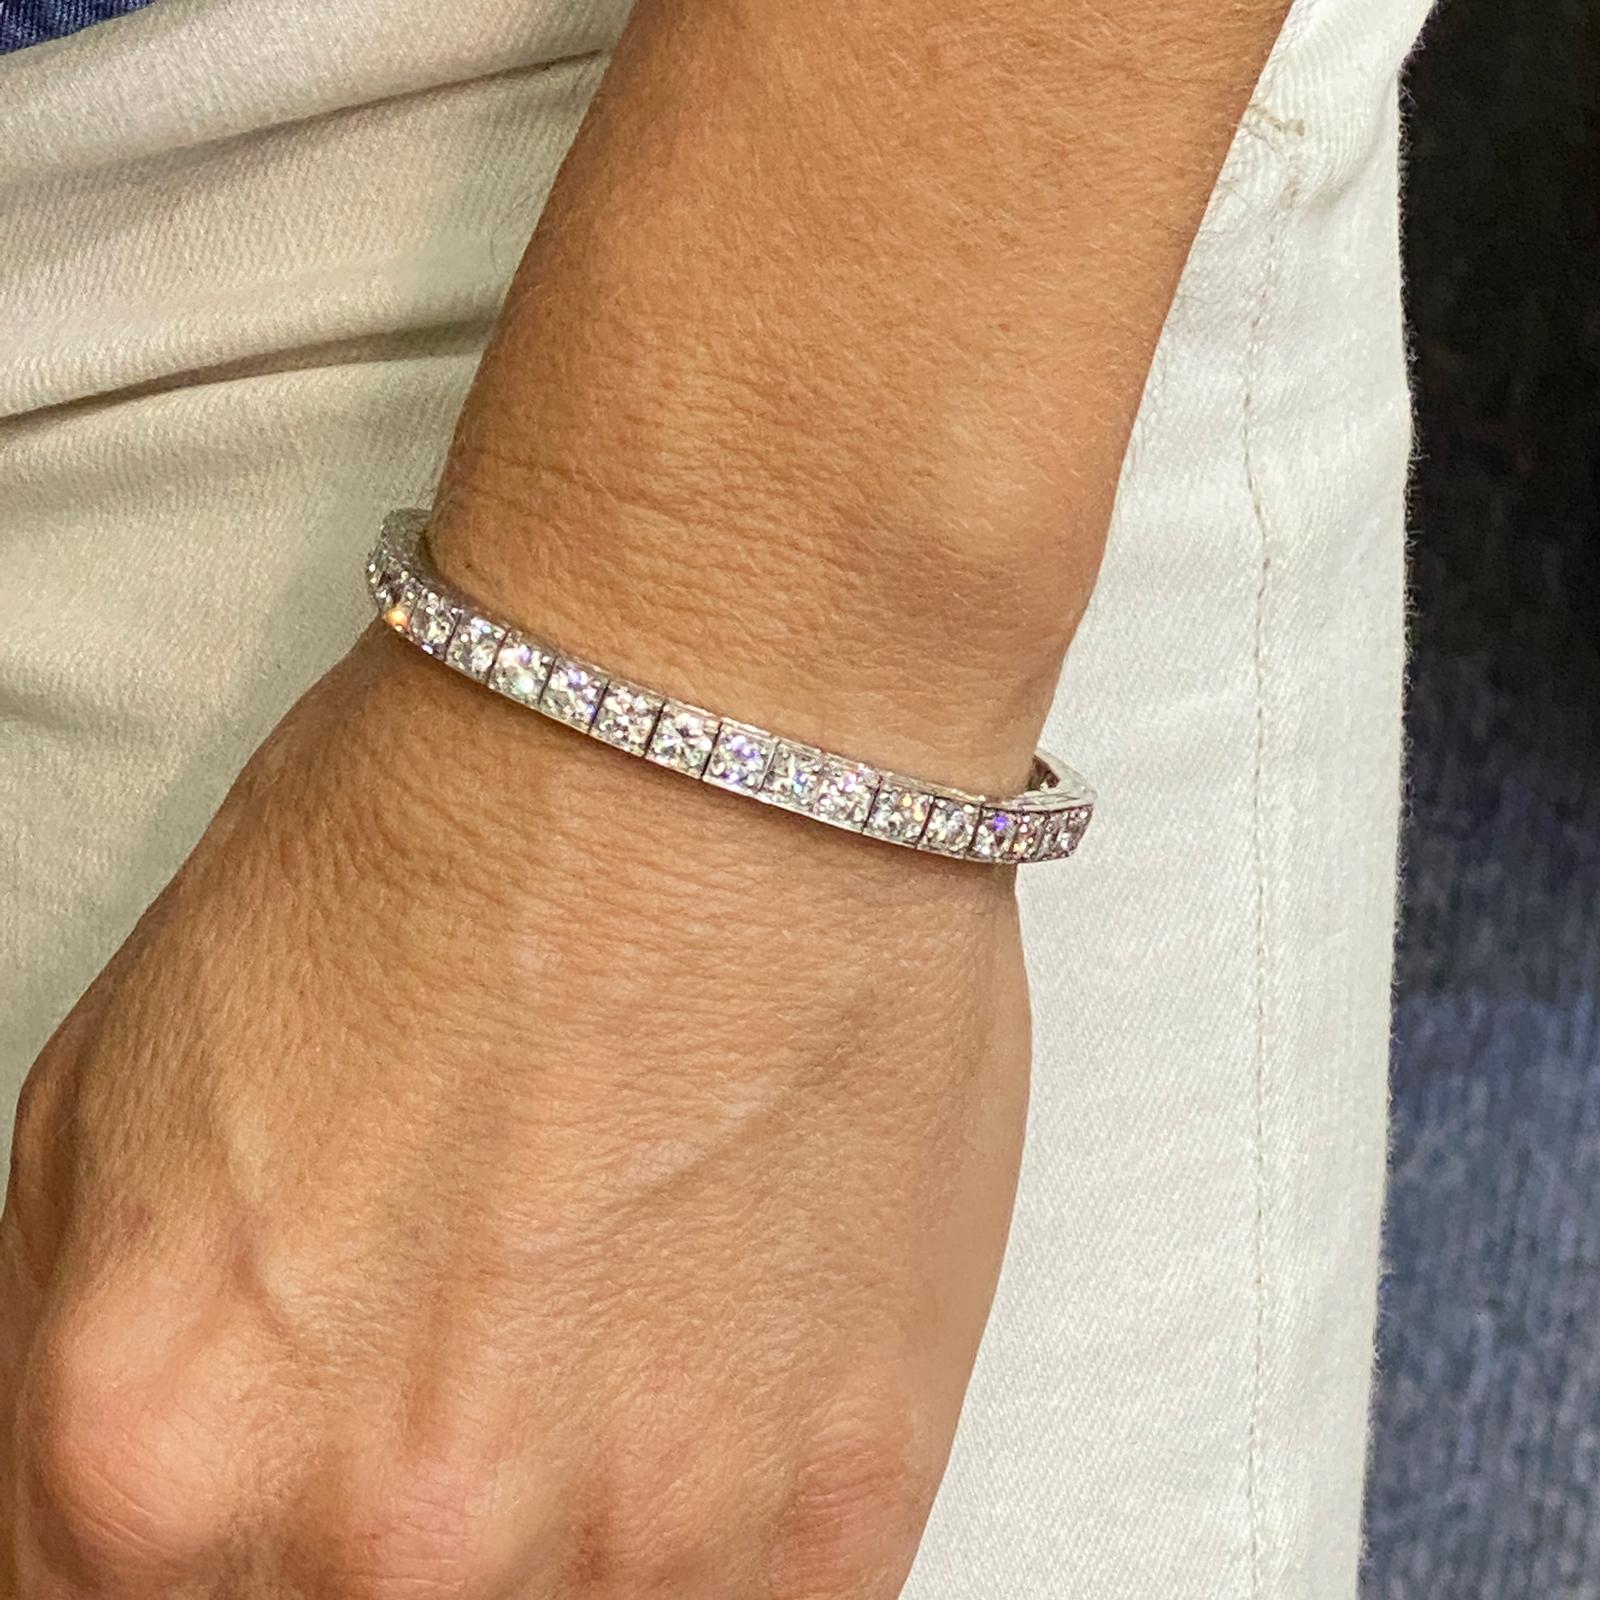 1950's diamond line bracelet fashioned in 14 karat white gold. The 37 round brilliant cut diamonds weigh approximately 9.25 carat total weight and are graded F color and VS clarity. Each diamond is approximately .25 carats. The bracelet measures 6.5